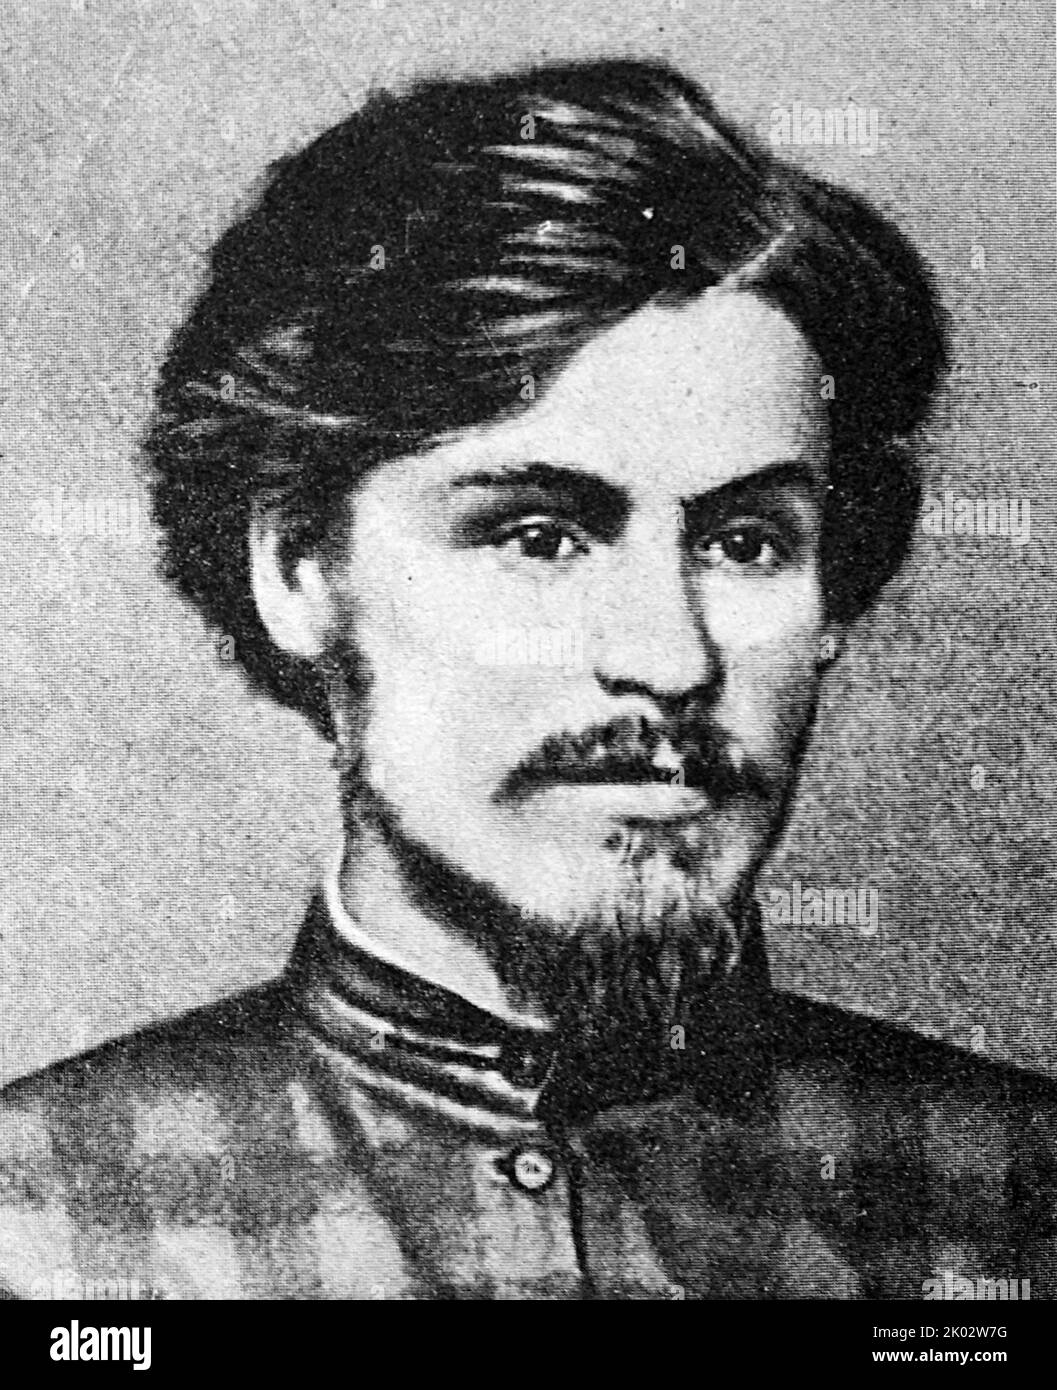 Stepan Nikolaevich Khalturin. Known as a Russian revolutionary, member of the revolutionary organization Narodnaya Volya (Peoples Will), and responsible for an attempted assassination of Alexander II of Russia. Stock Photo